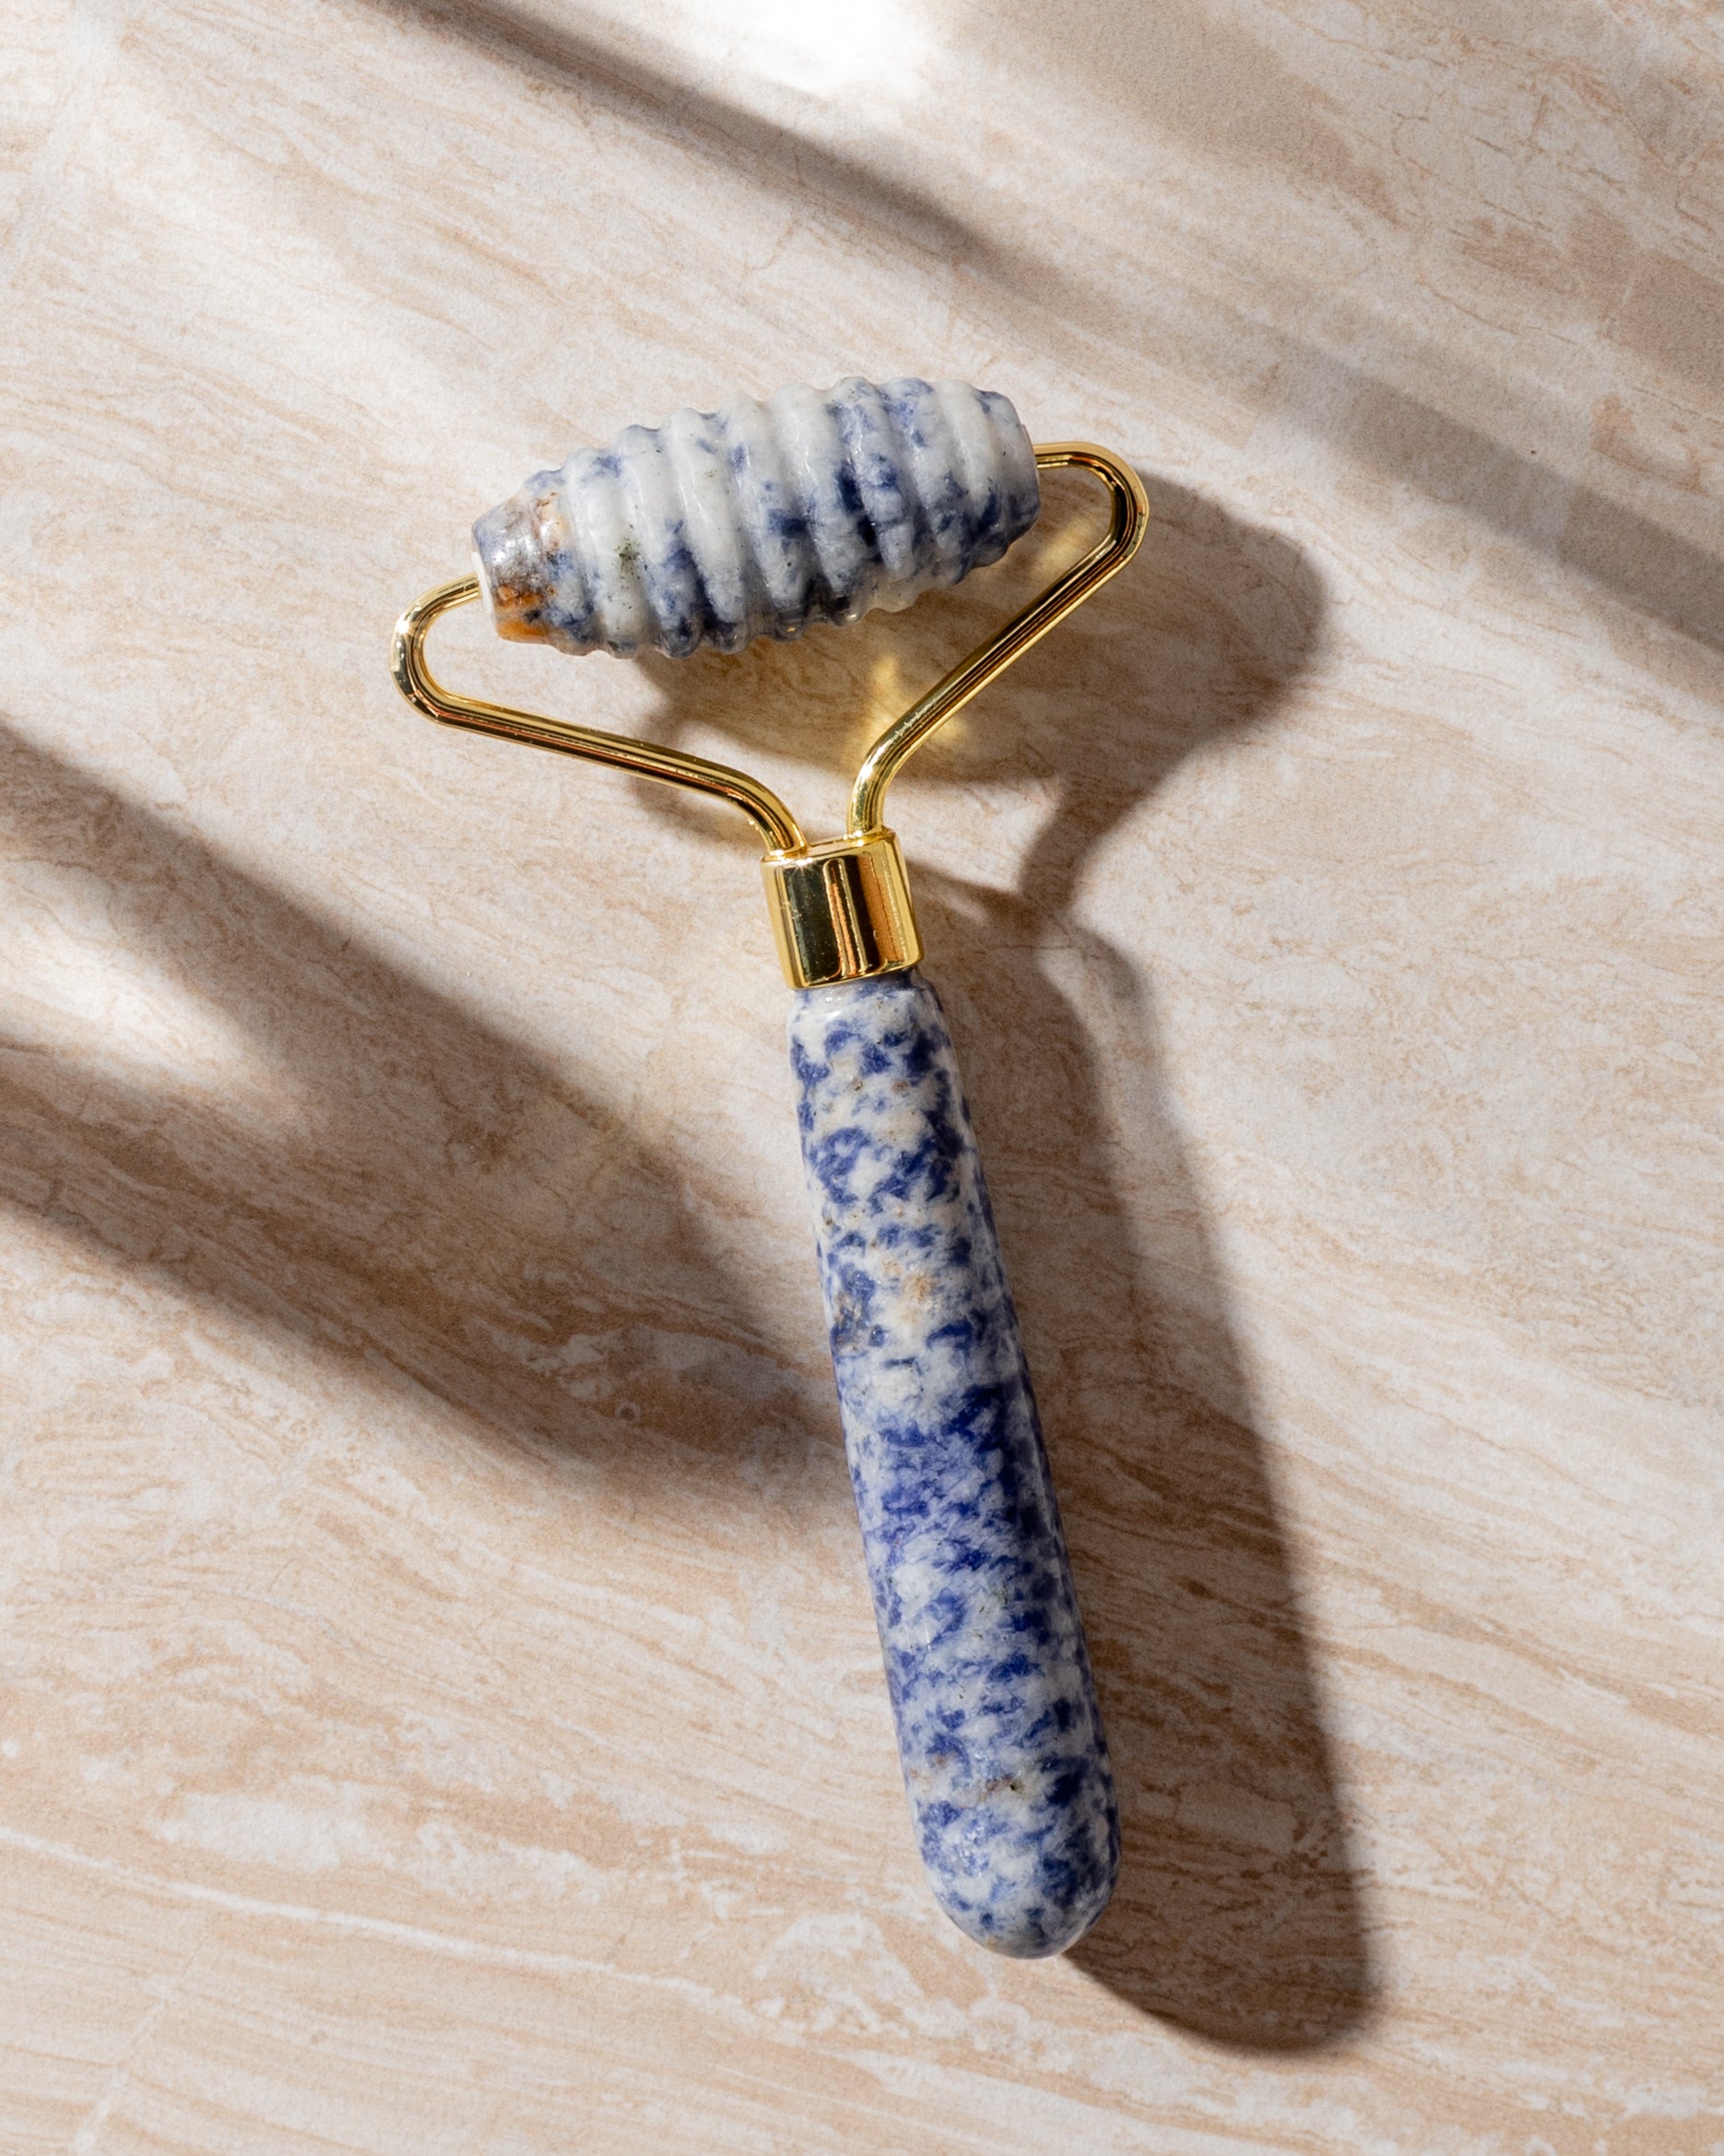 Sodalite Blue Stone Spiked Roller